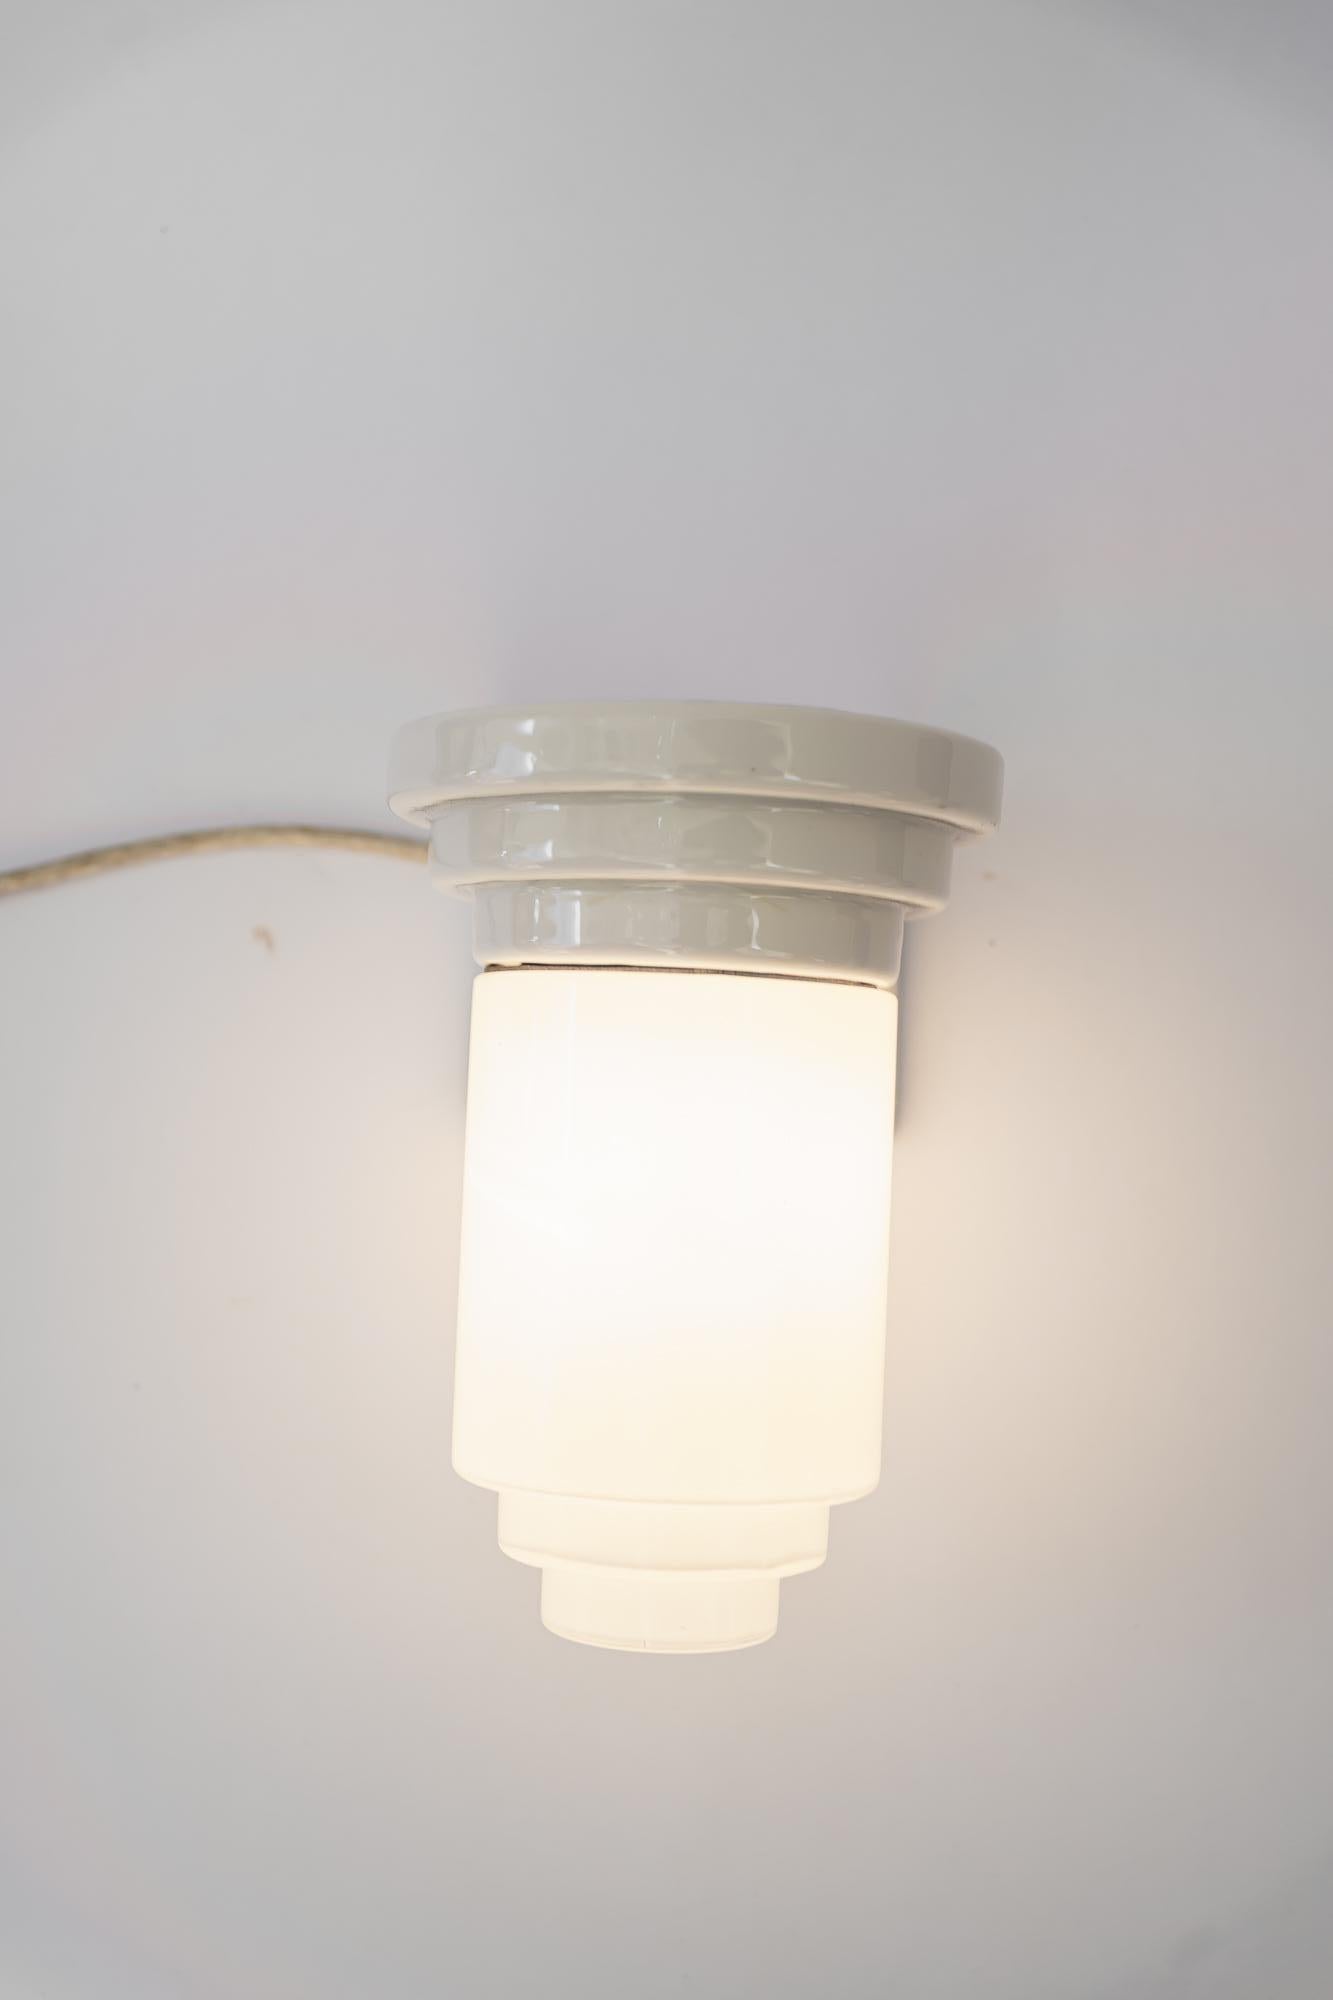 Early 20th Century Porcelain Bauhaus Wall Lamp with Original Glass Shade Germany Around 1920